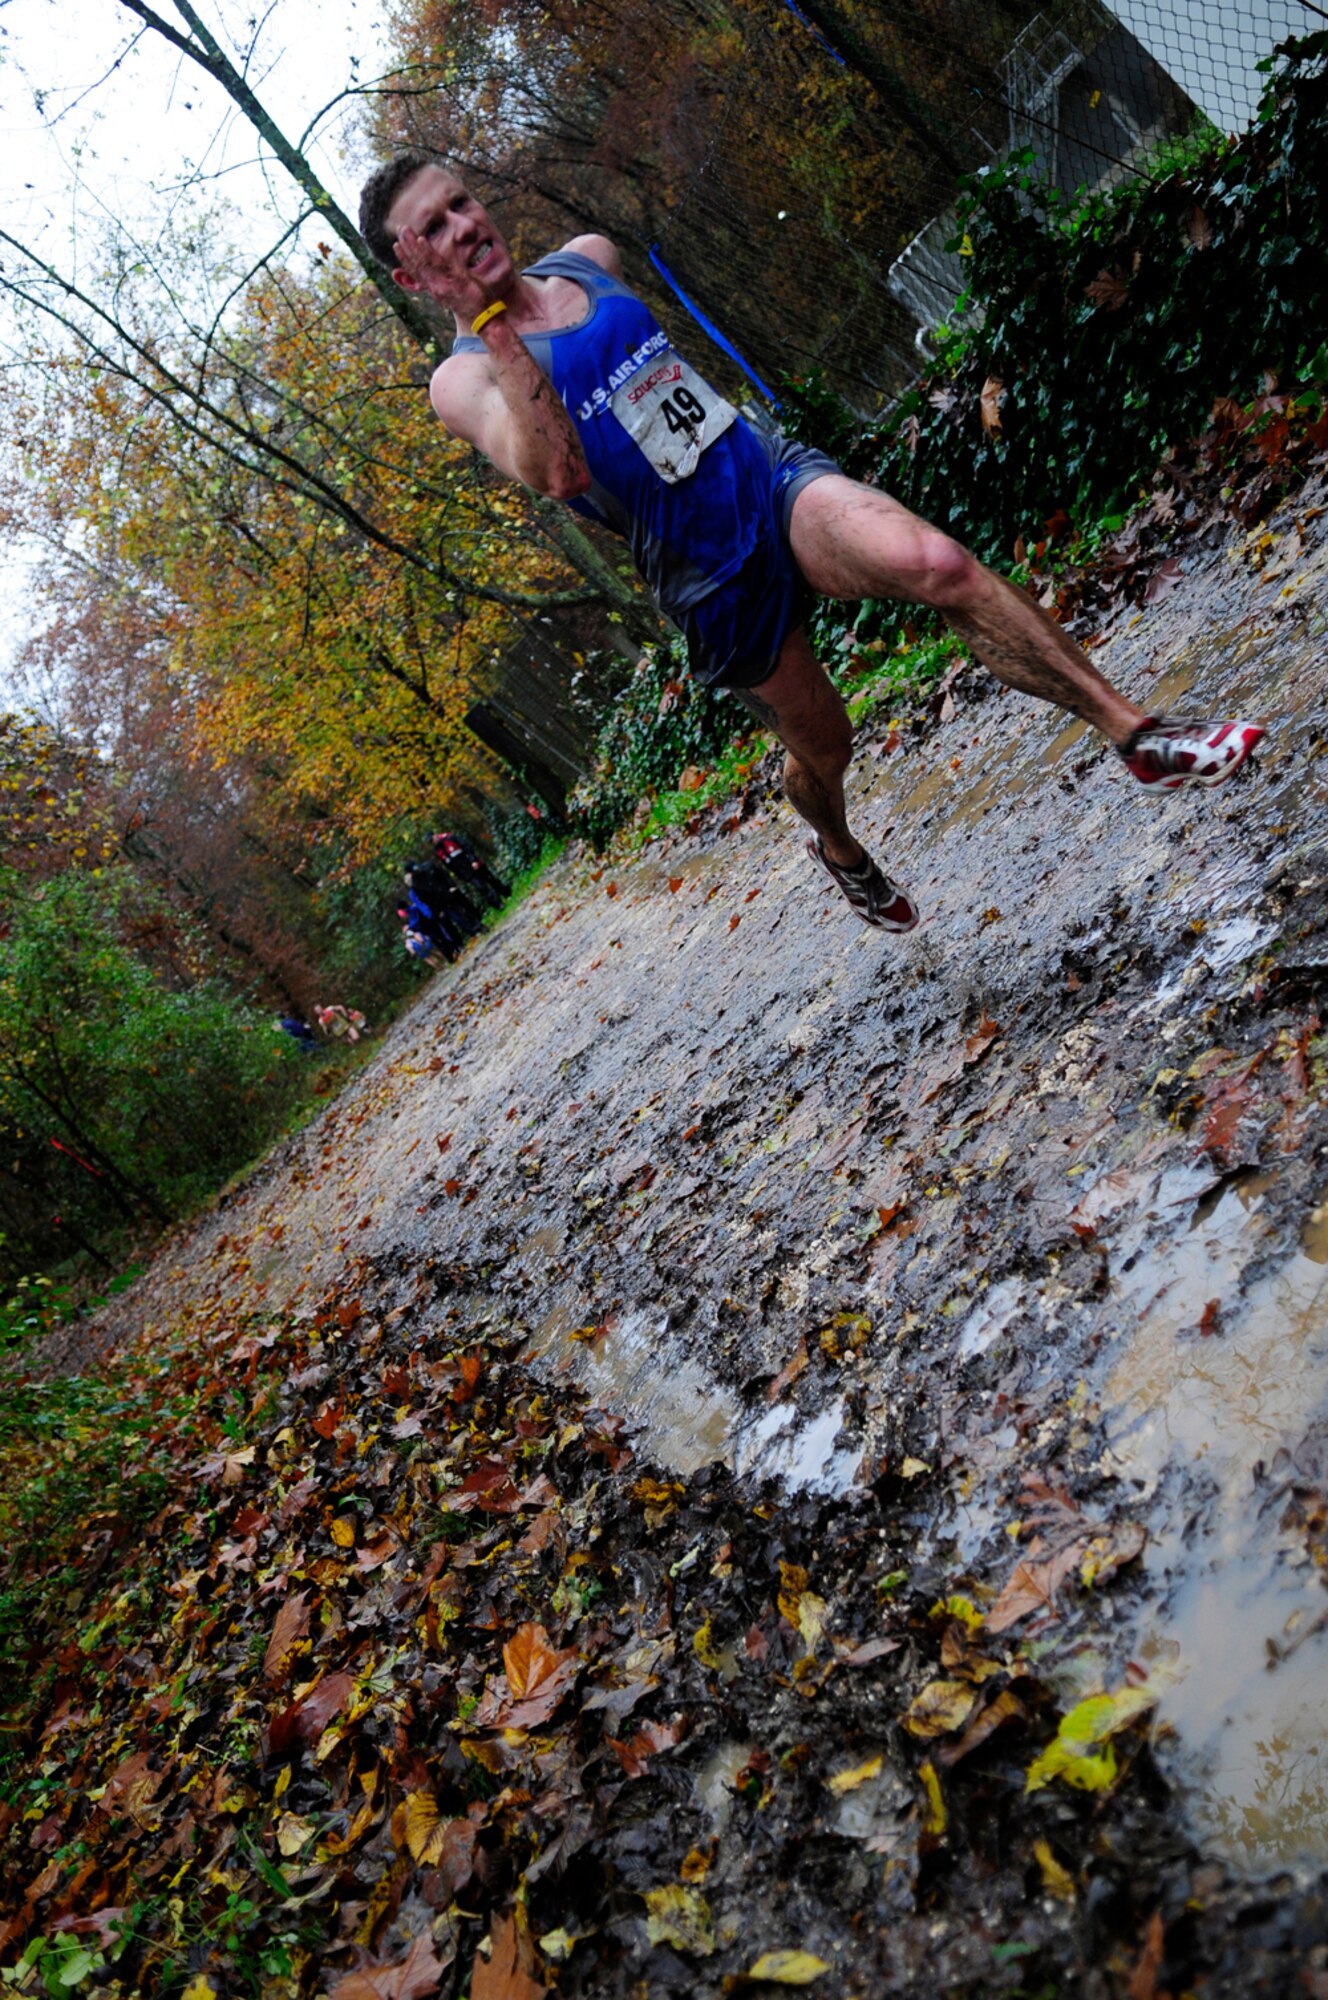 AVIANO AIR BASE, Italy -- Airman 1st Class Jon Porubsky, 100th Security Forces Squadron, runs along muddy trails during the Headquarters Allied Air Command Cross Country Championships Nov. 9, 2010, at Aviano Air Base, Italy. Airman Porubsky was part of the U.S. Air Forces in Europe men's cross country team, and competed against other teams from different European air forces, including those from England, Germany and Poland. The USAFE team placed second to the Polish air force team. The 100th SFS Airman described the course as very muddy and slippery, with sharp turns that went around cliffs that you could have fallen off and rolled down a mountain. (U.S. Air Force photo/Airman 1st Class Katherine Windish)